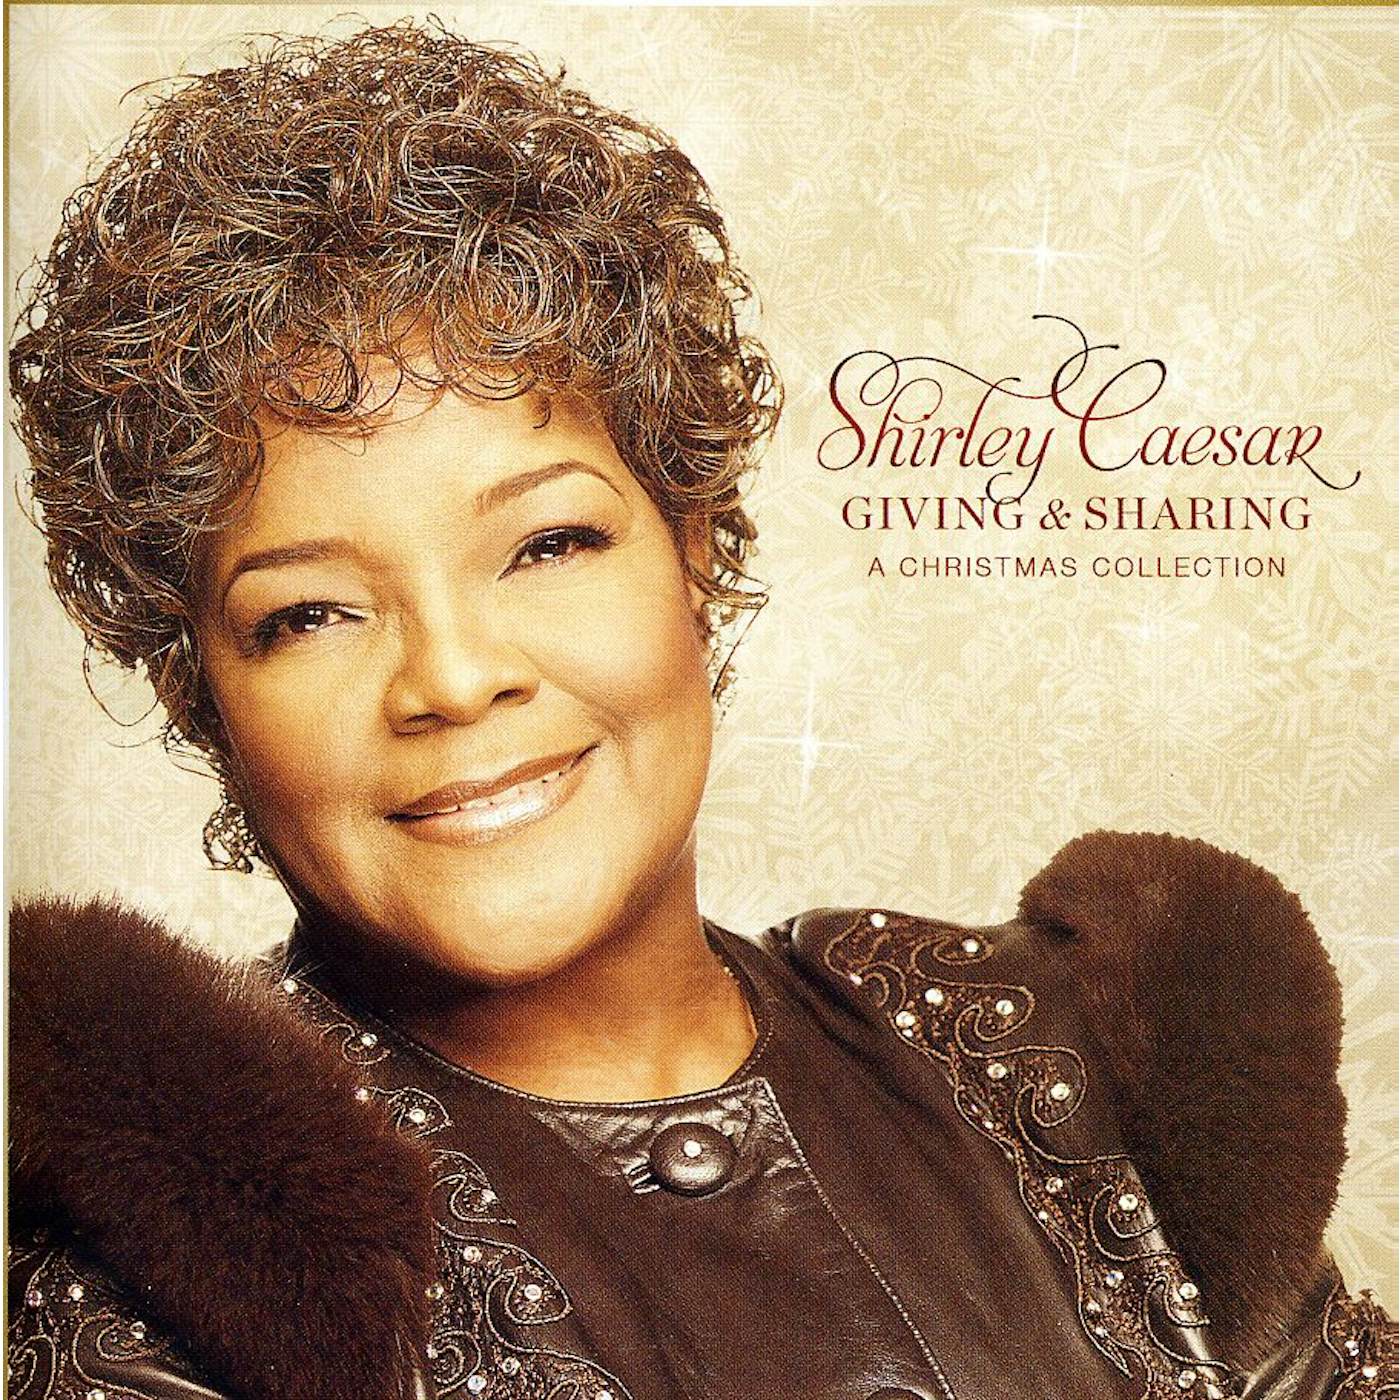 Shirley Caesar GIVING & SHARING: A CHRISTMAS COLLECTION CD